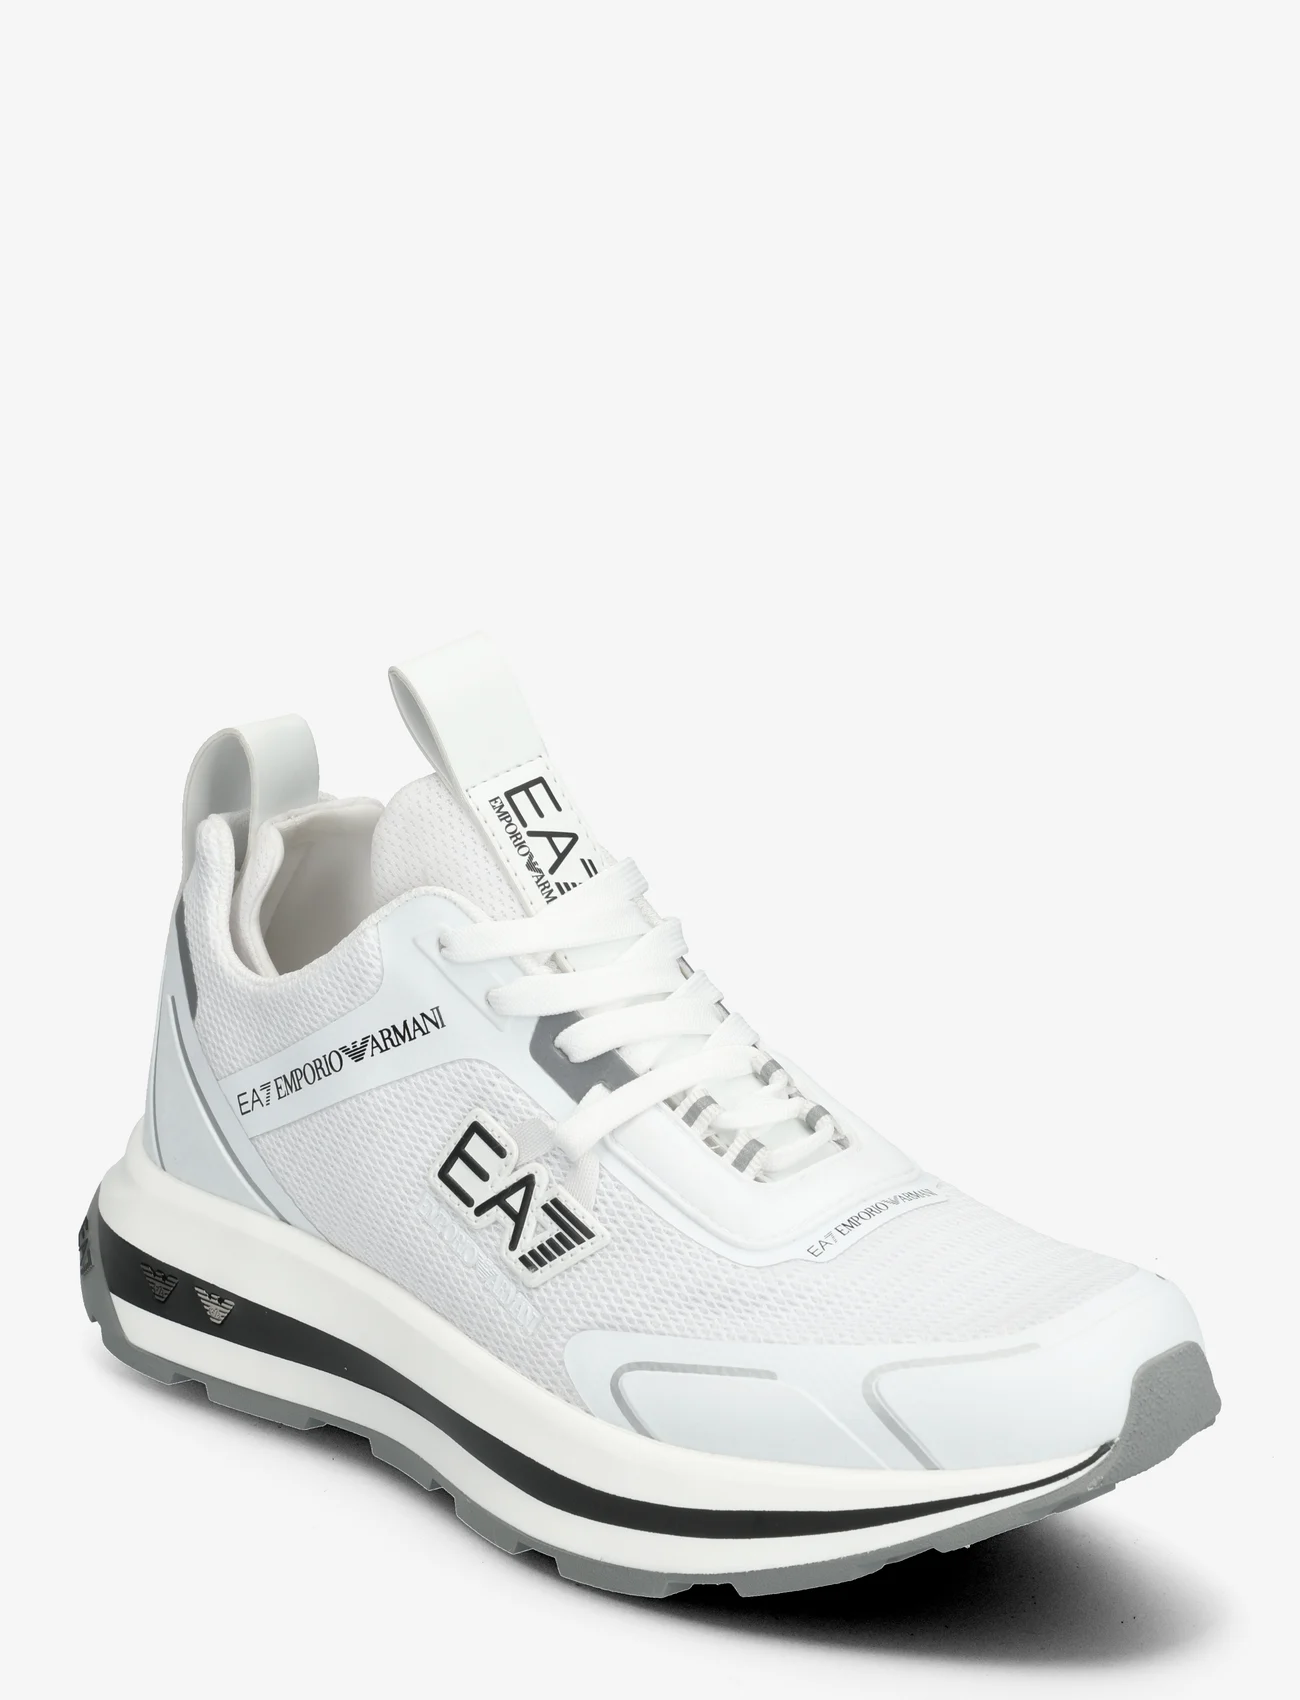 EA7 - SNEAKERS - lave sneakers - t539-white+blk+griffin - 0